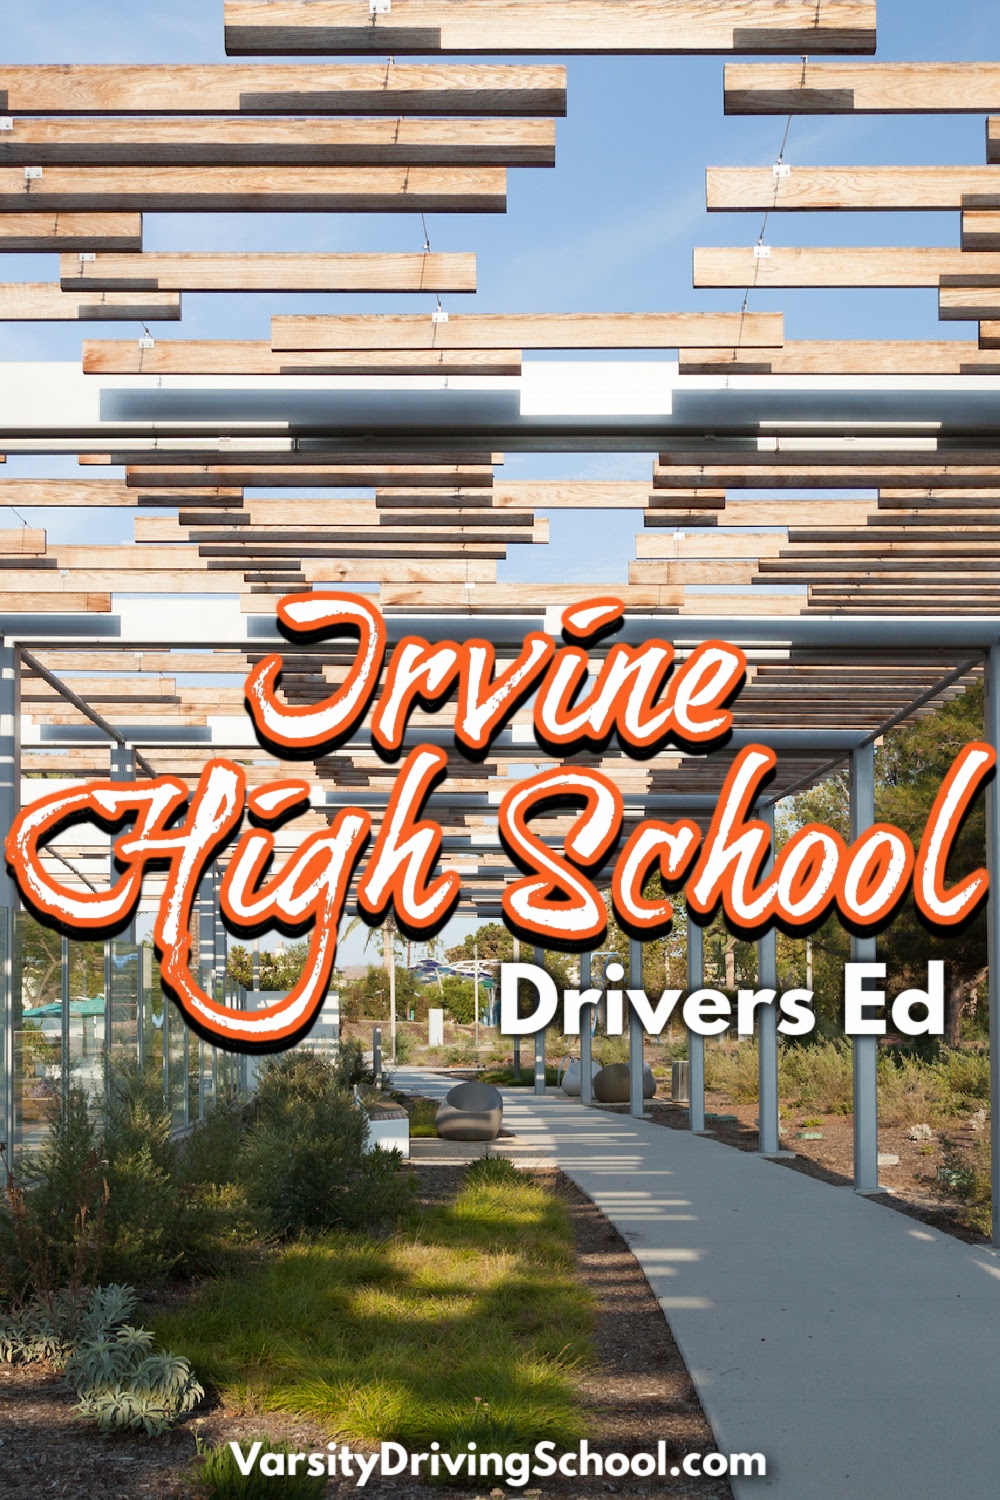 Welcome to Varsity Driving Academy, your #1 rated Irvine High School Driver's Ed.